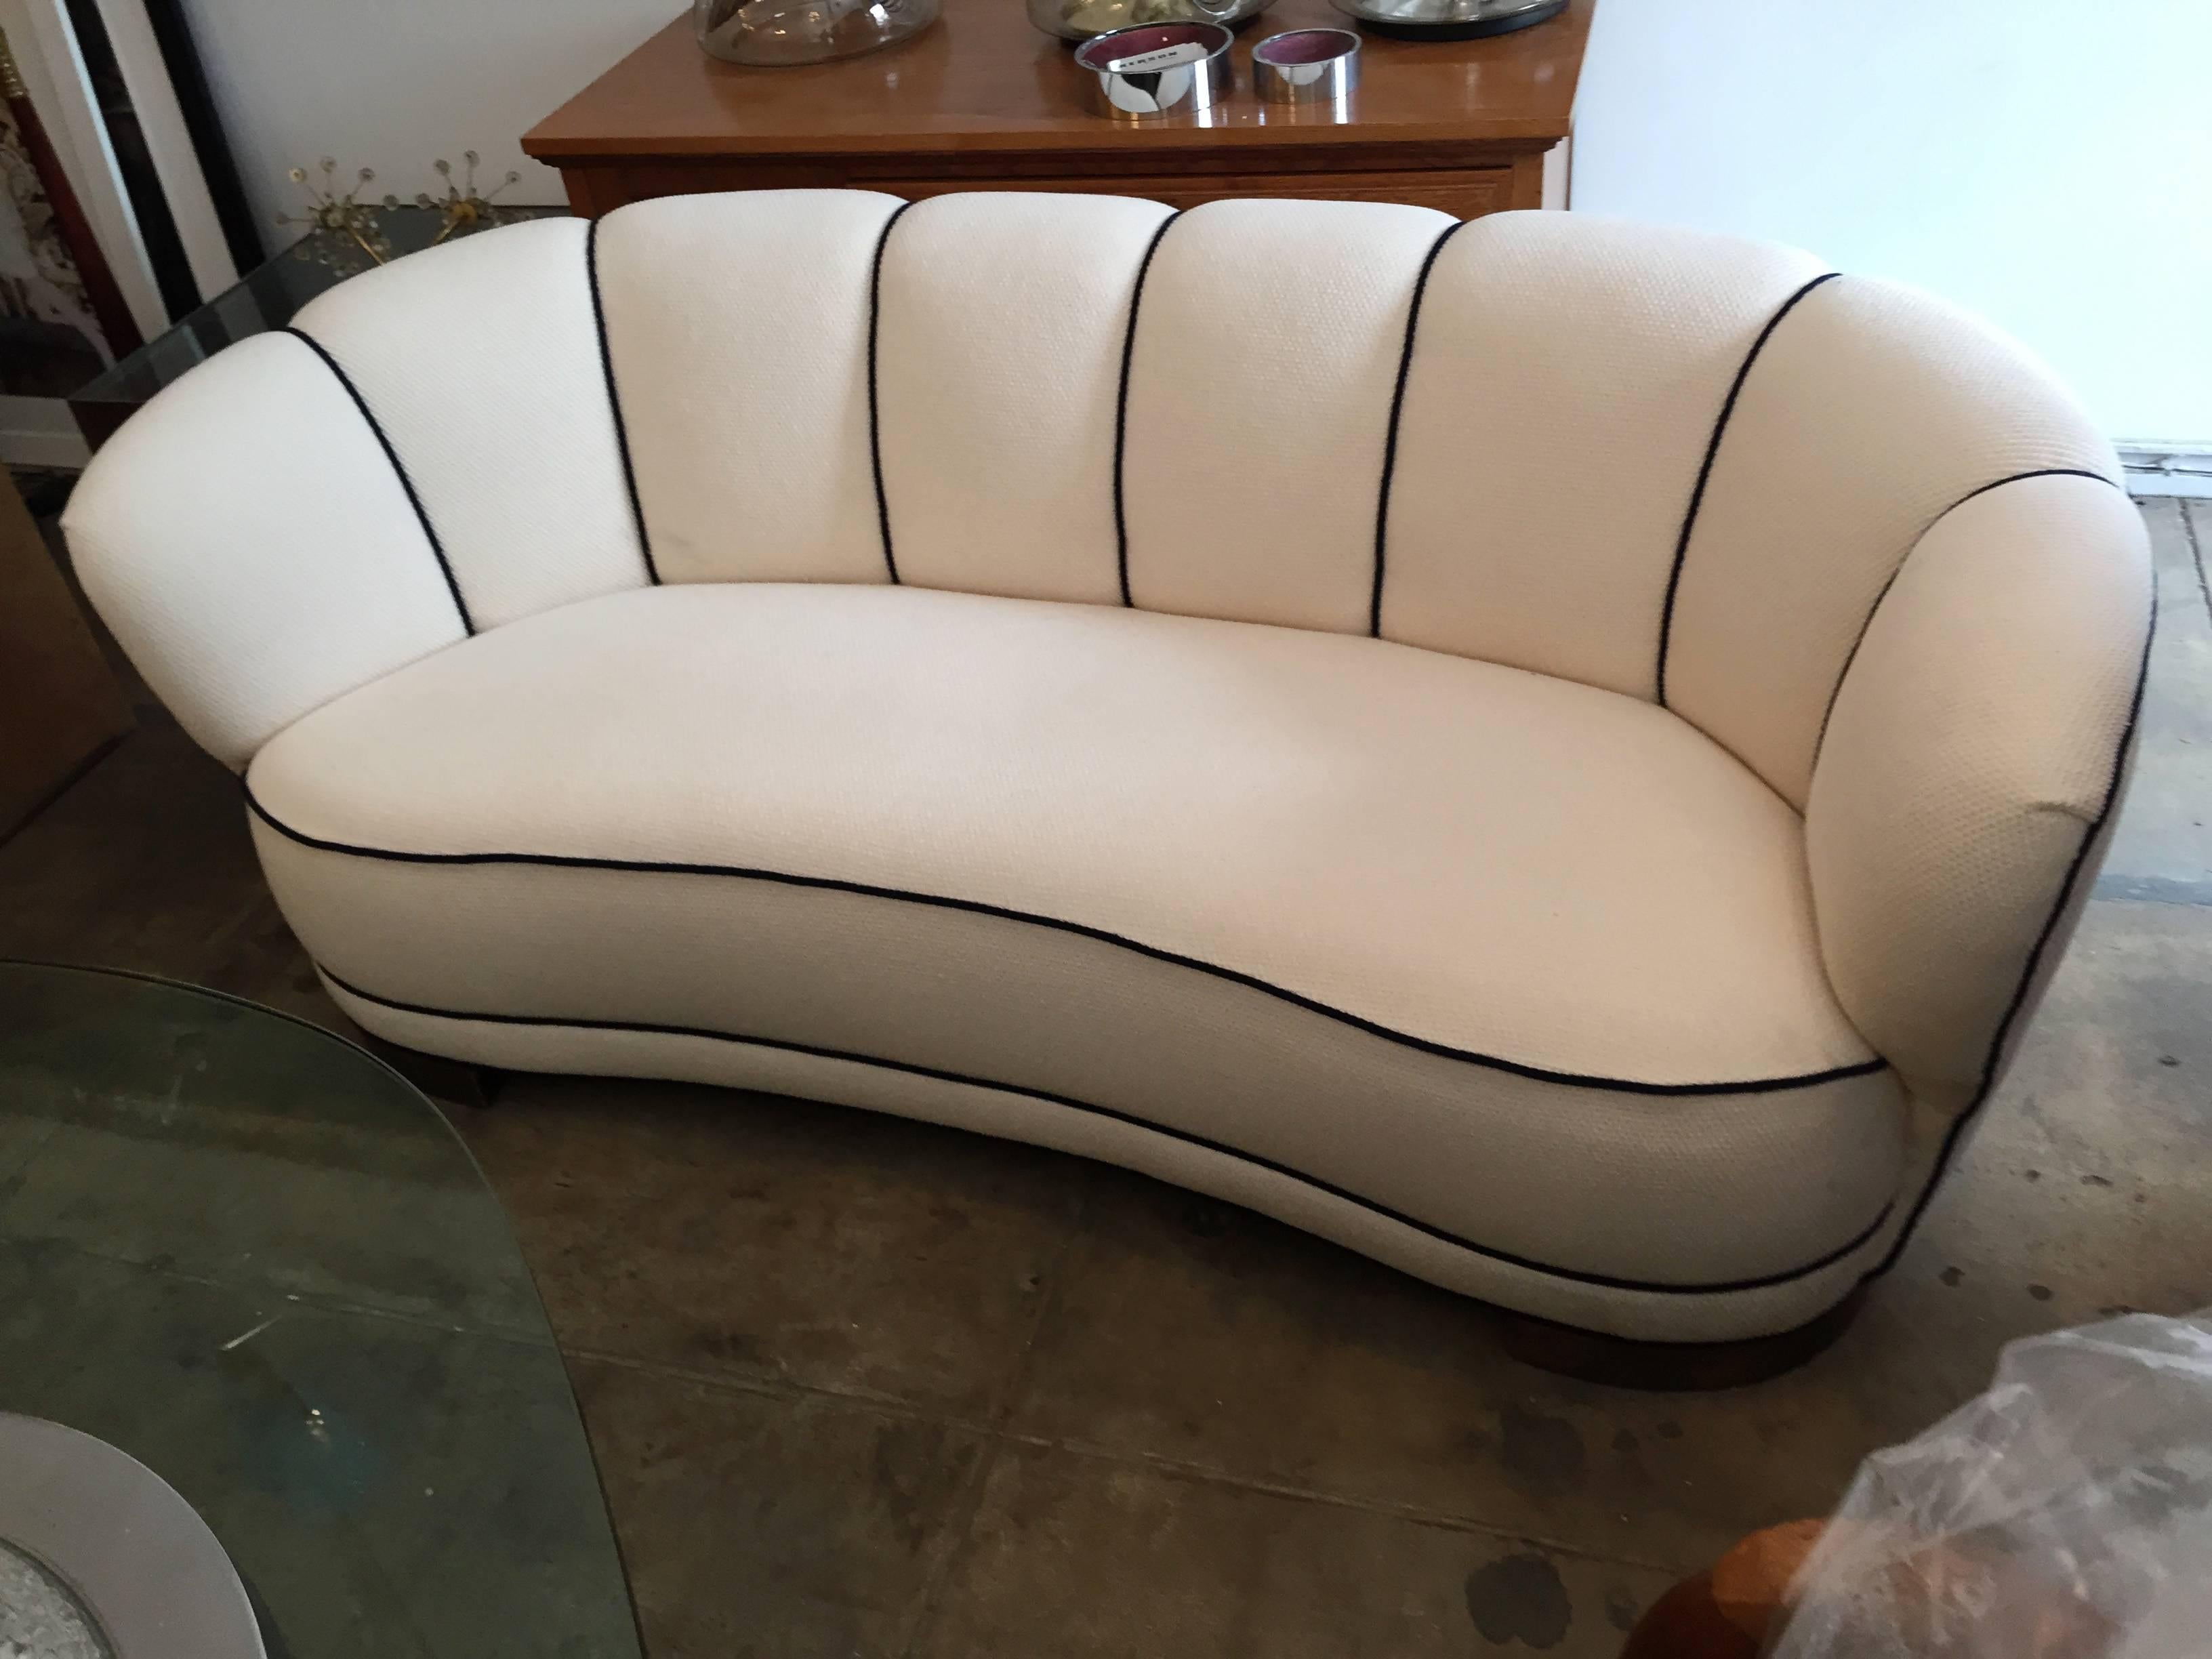 A wonderful original 1930s Swedish Art Deco curved sofa reupholstered in a light cream wool with navy piping for a nautical look.